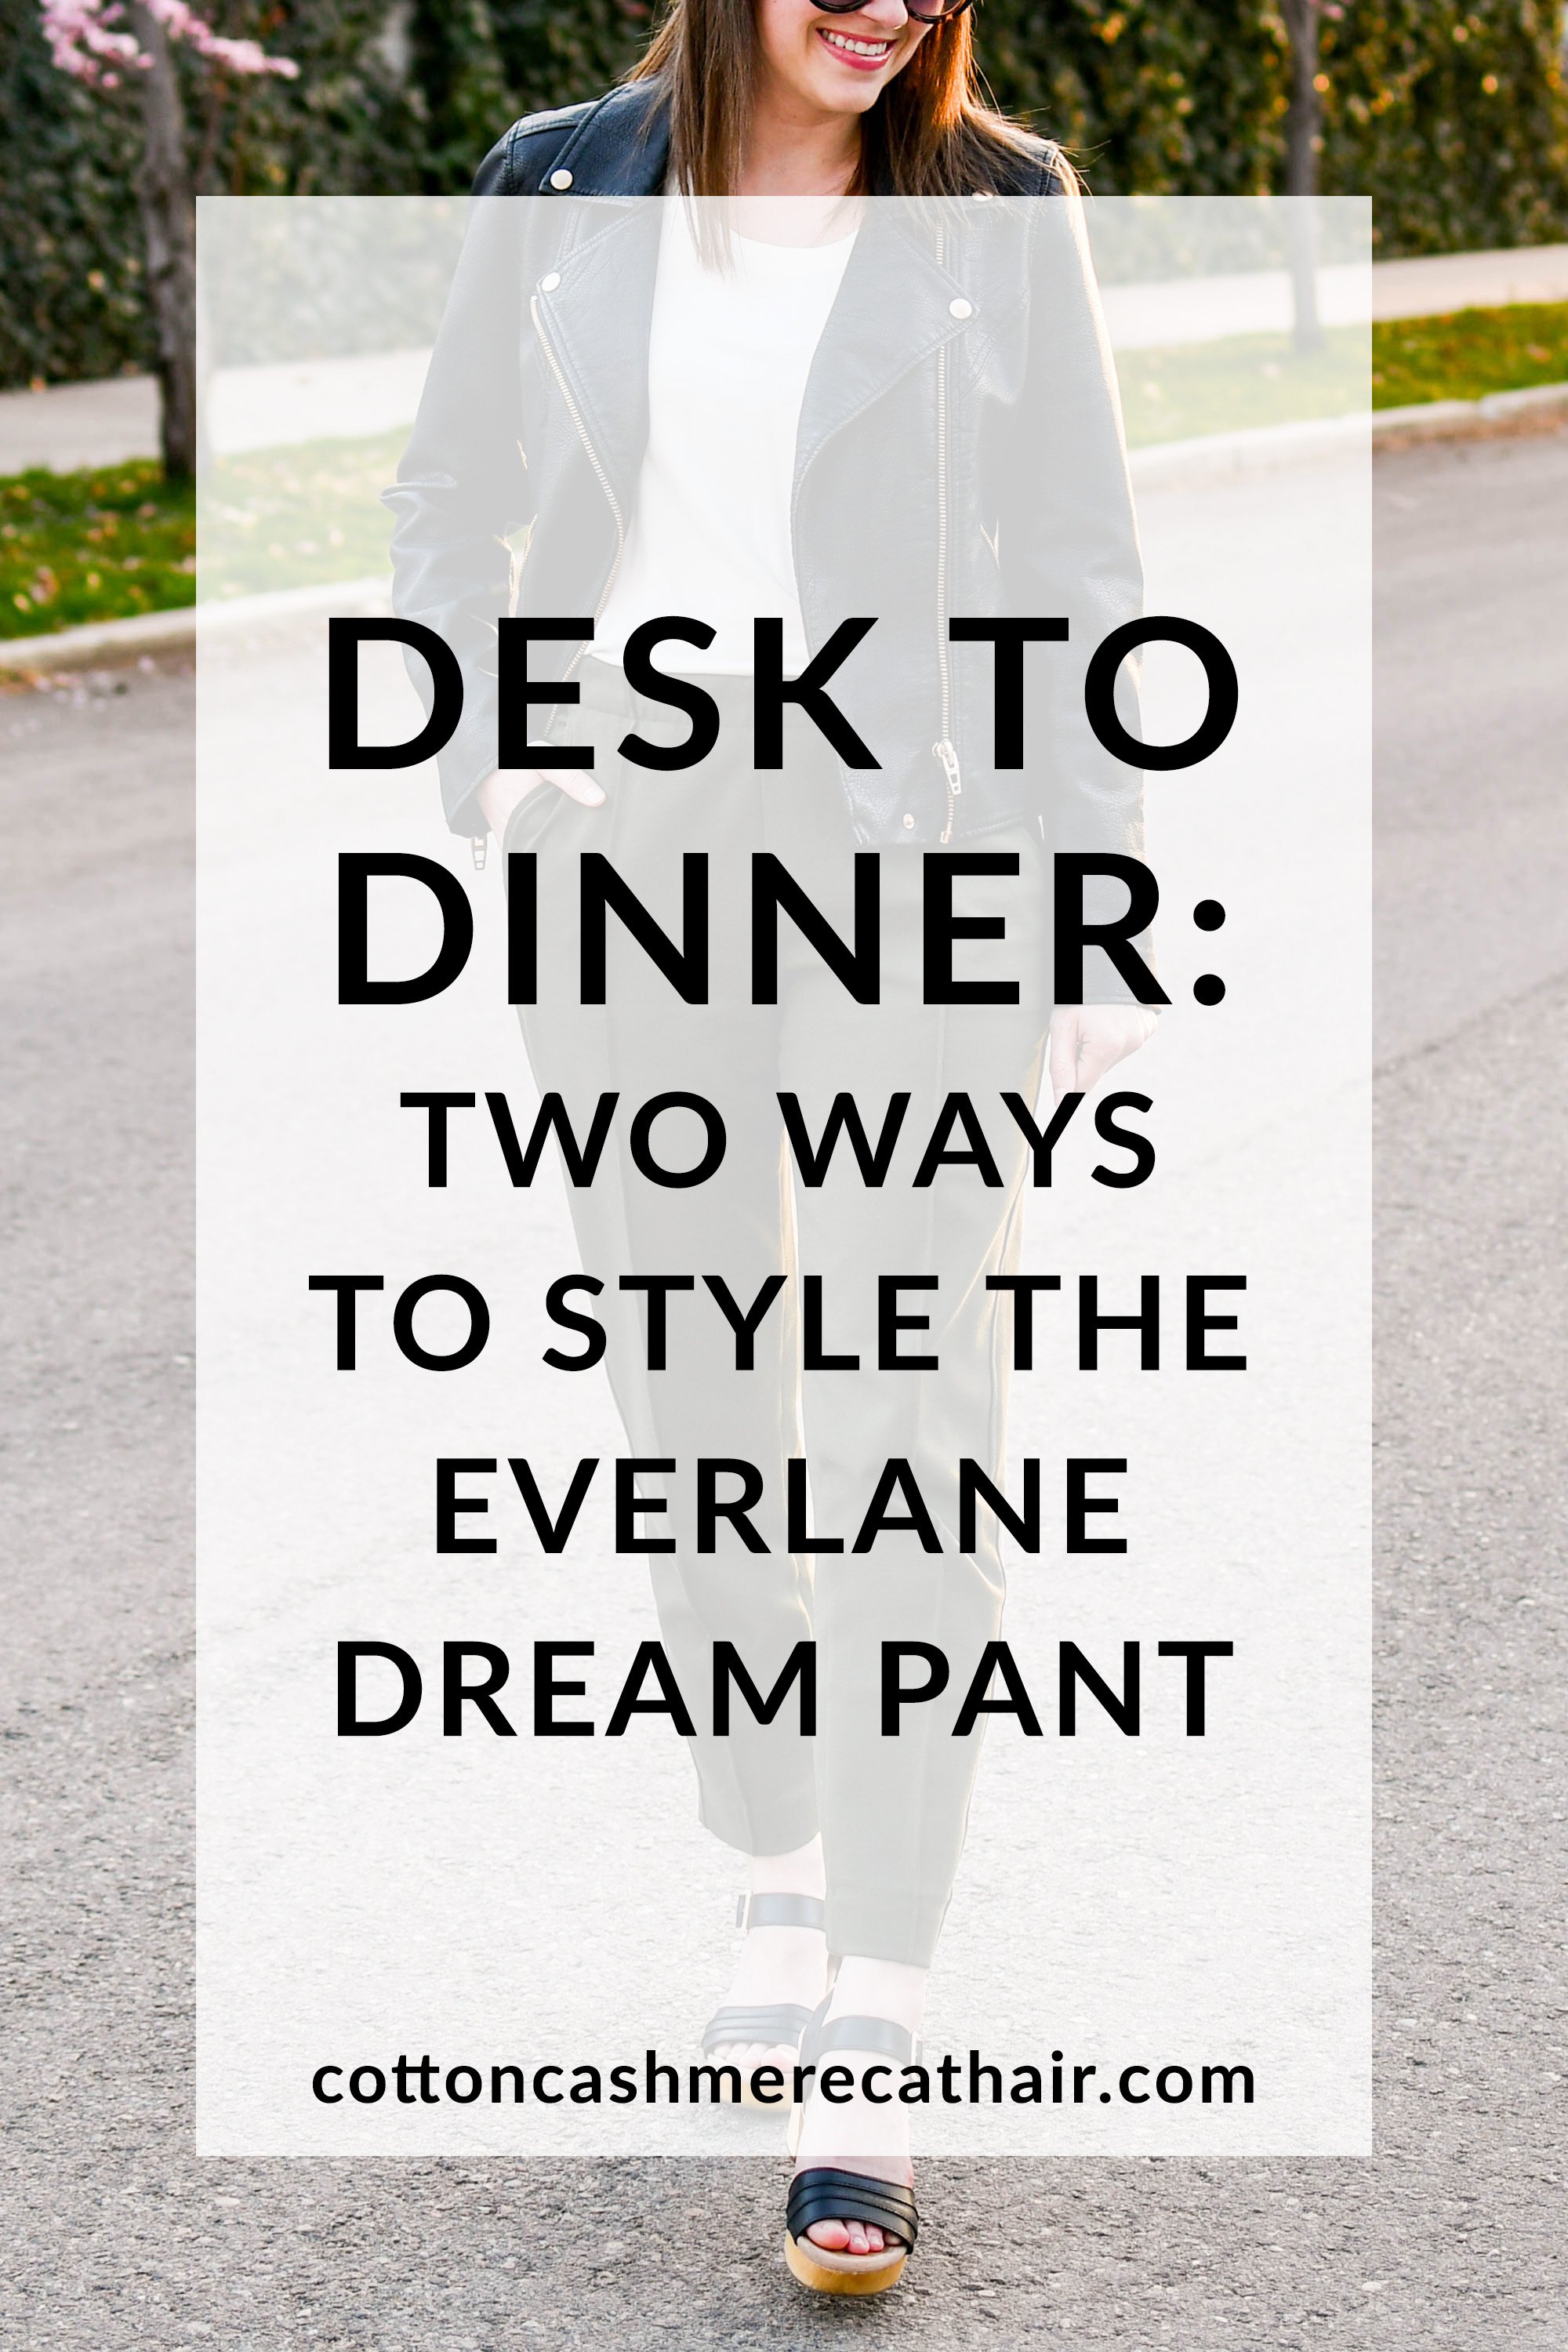 How to Style the Everlane Dream Pant